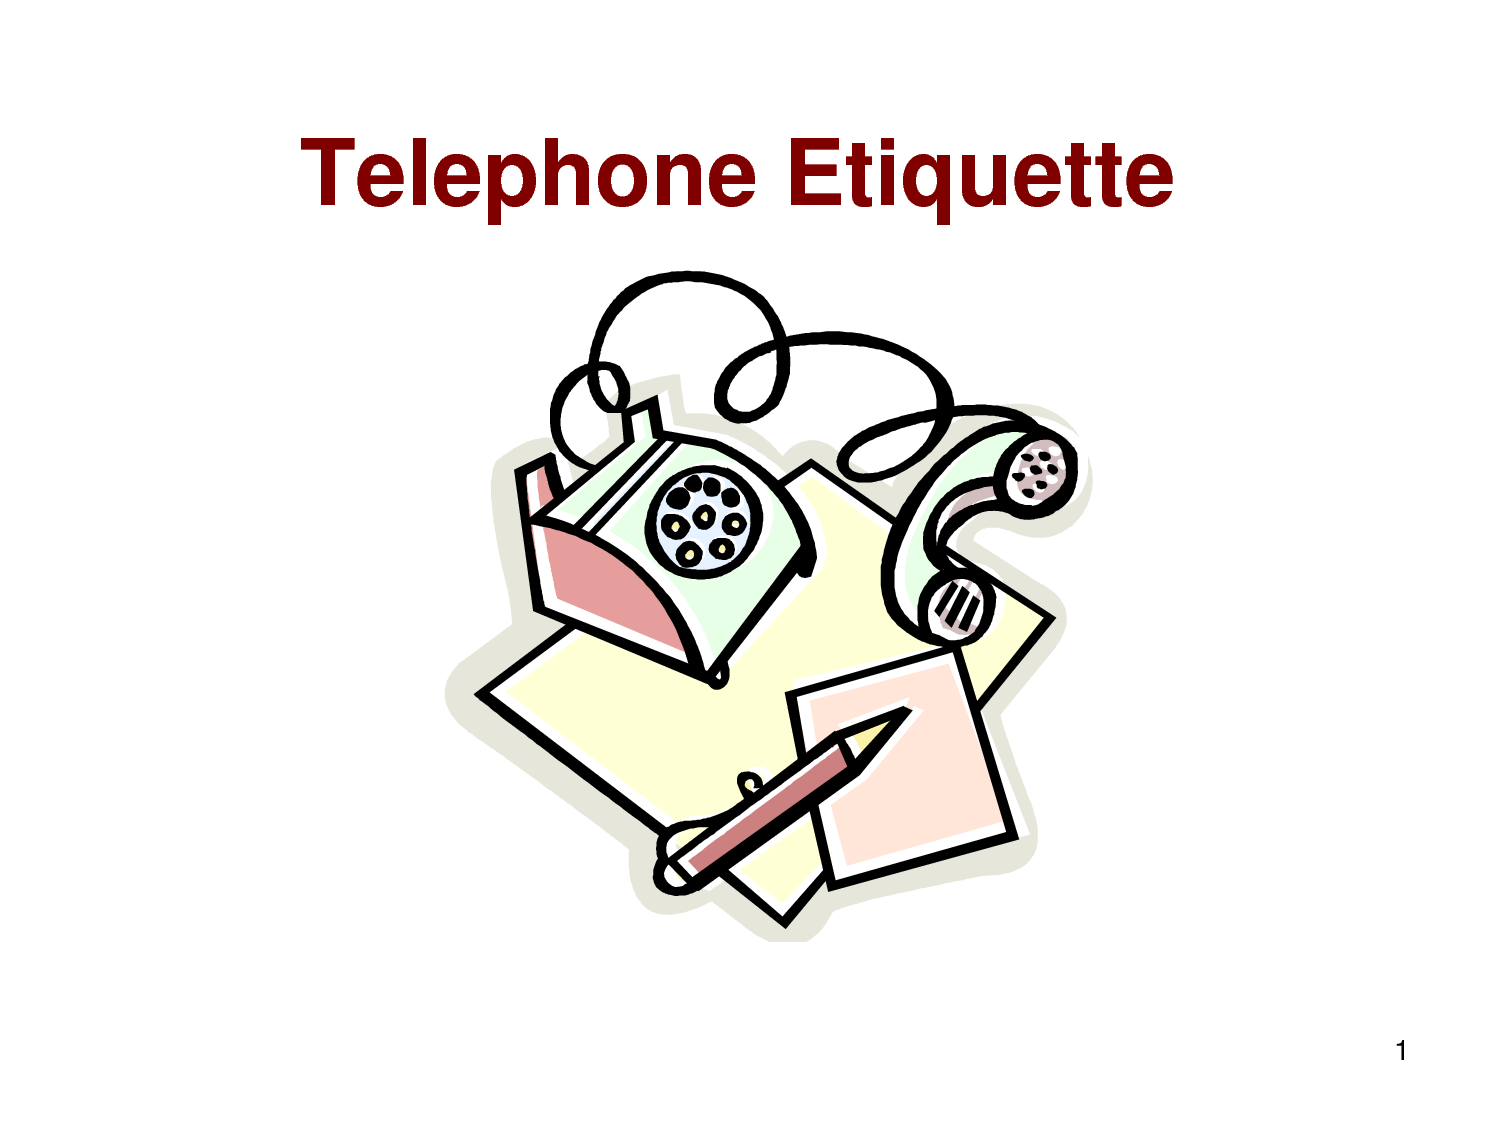 Hi Friends, Many Times We Speak With Our Clients On Phone. So It Is Very Important For Us To Know The Basic Dou0027S And Dontu0027S Of Telephone Etiquette. - Telephone Etiquette Dos And Donts, Transparent background PNG HD thumbnail